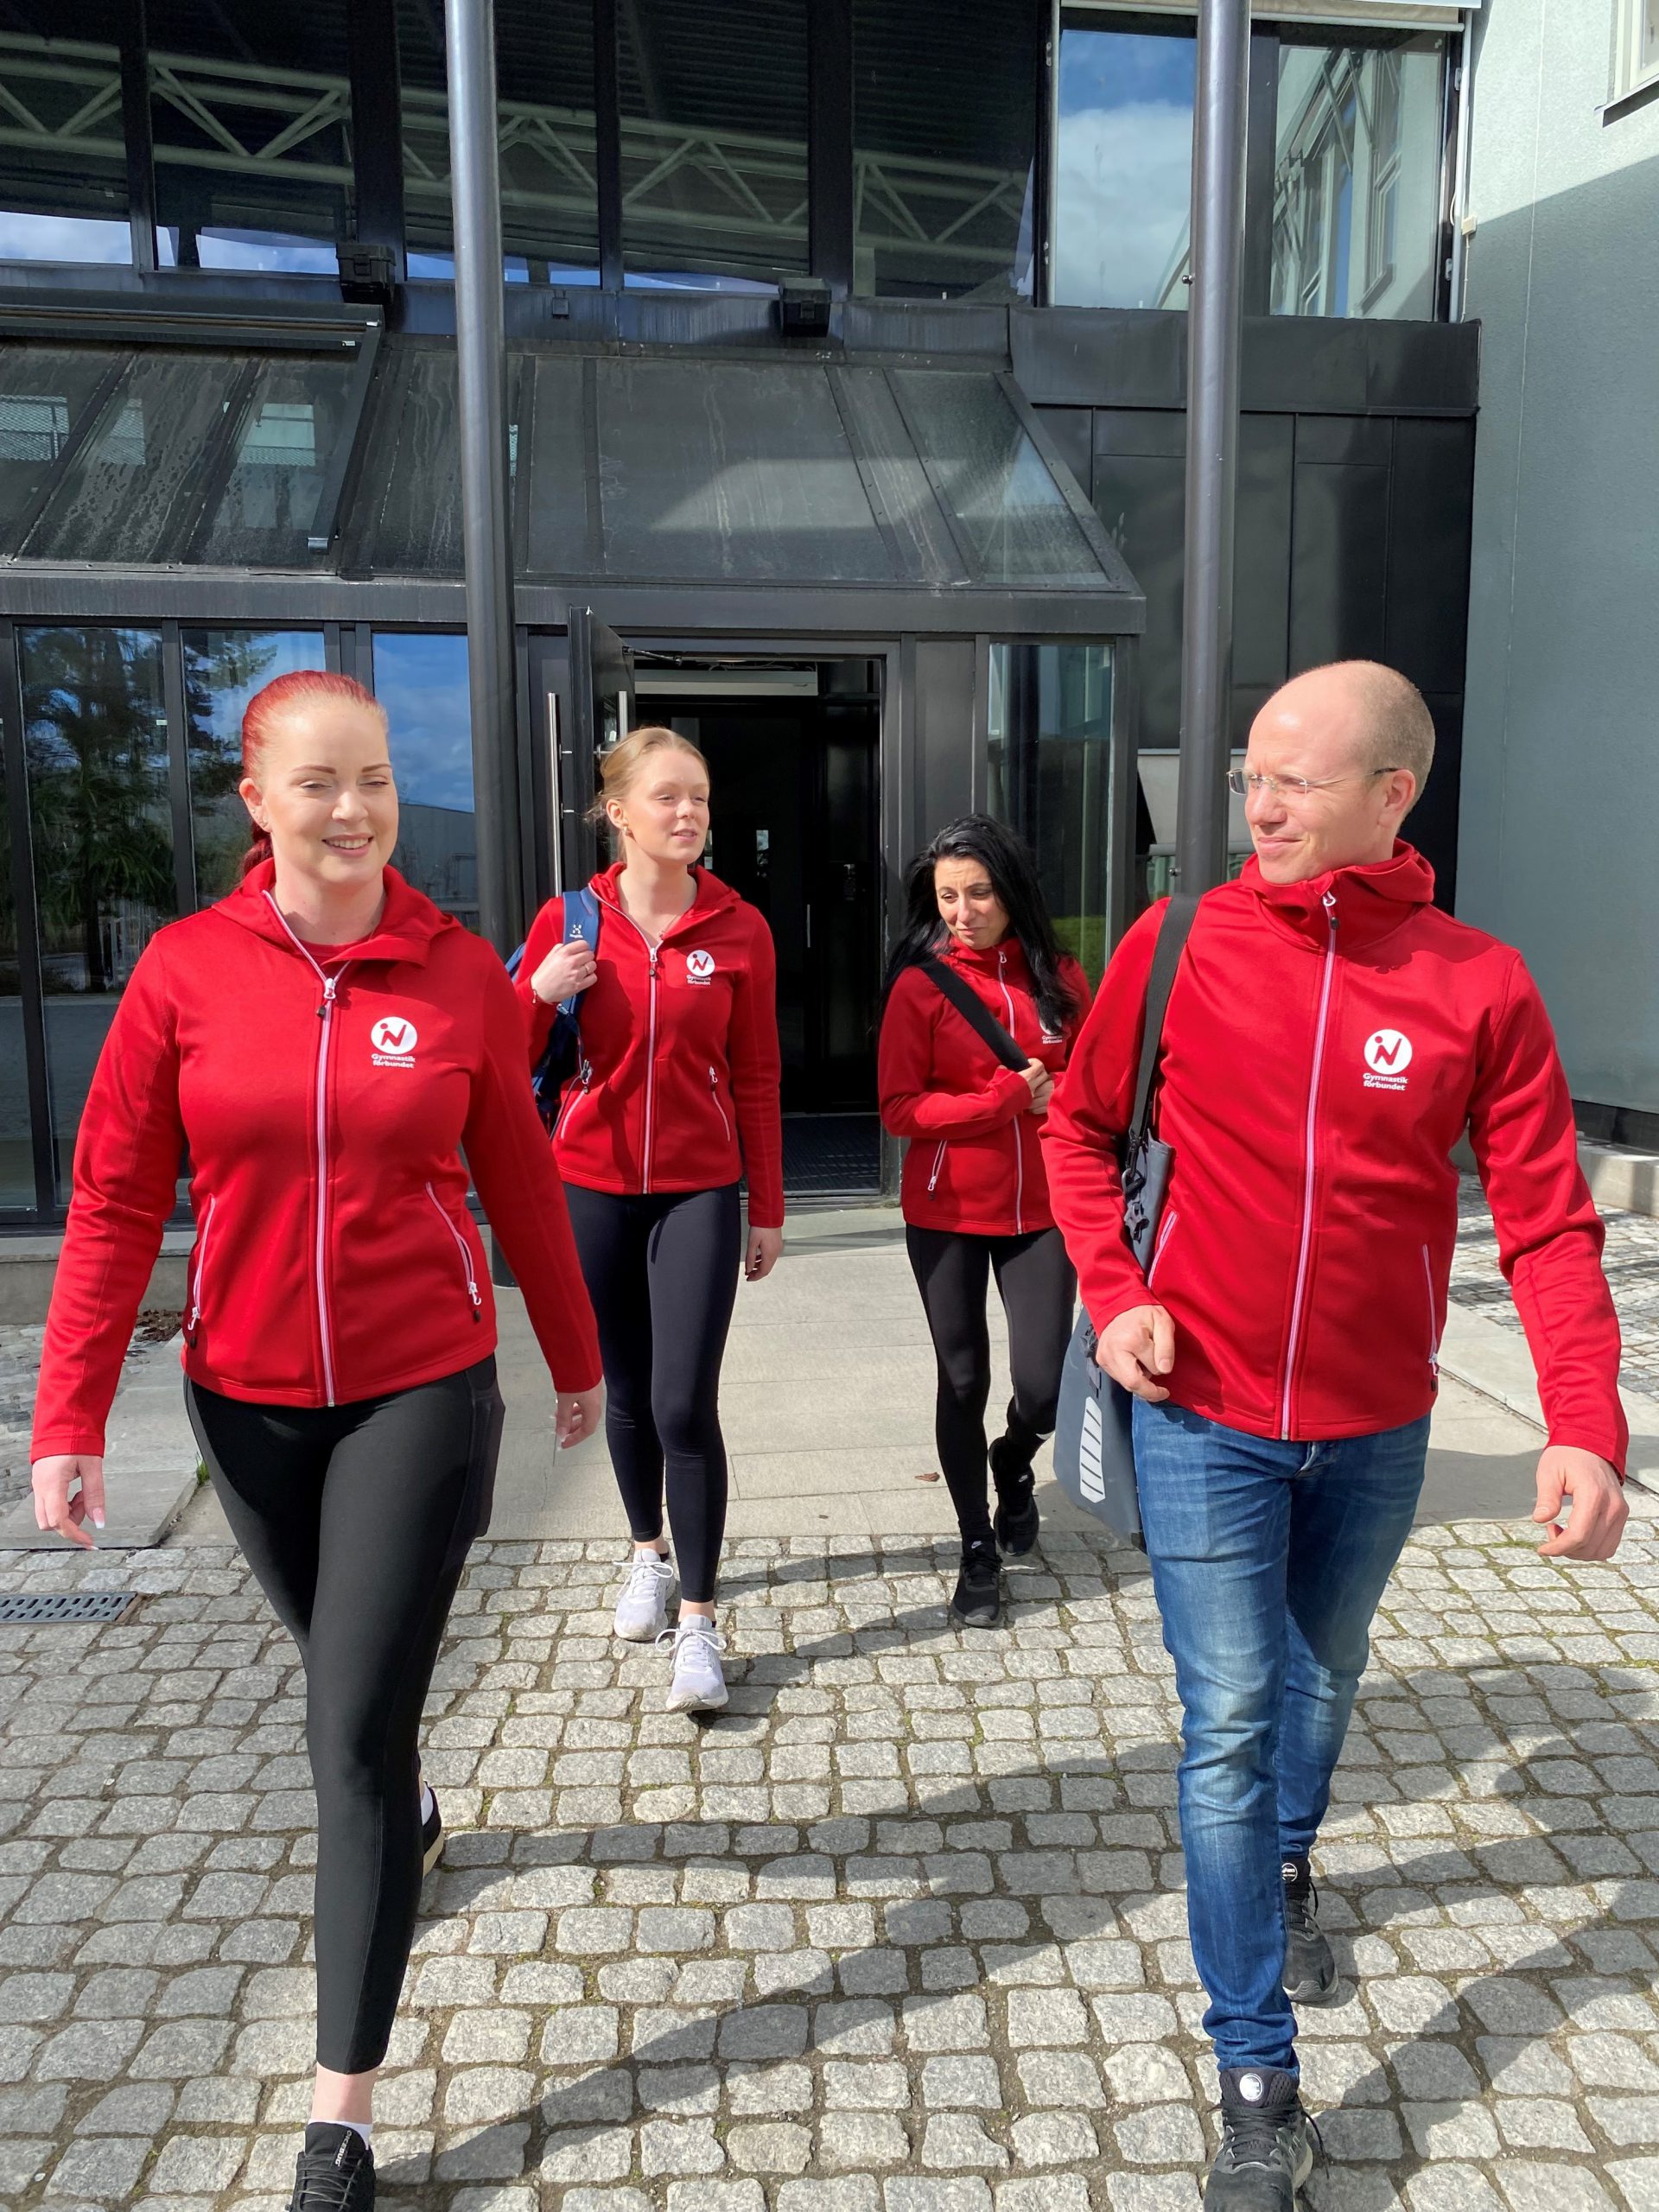 Four colleagues wearing the same red jacket walking out from a building